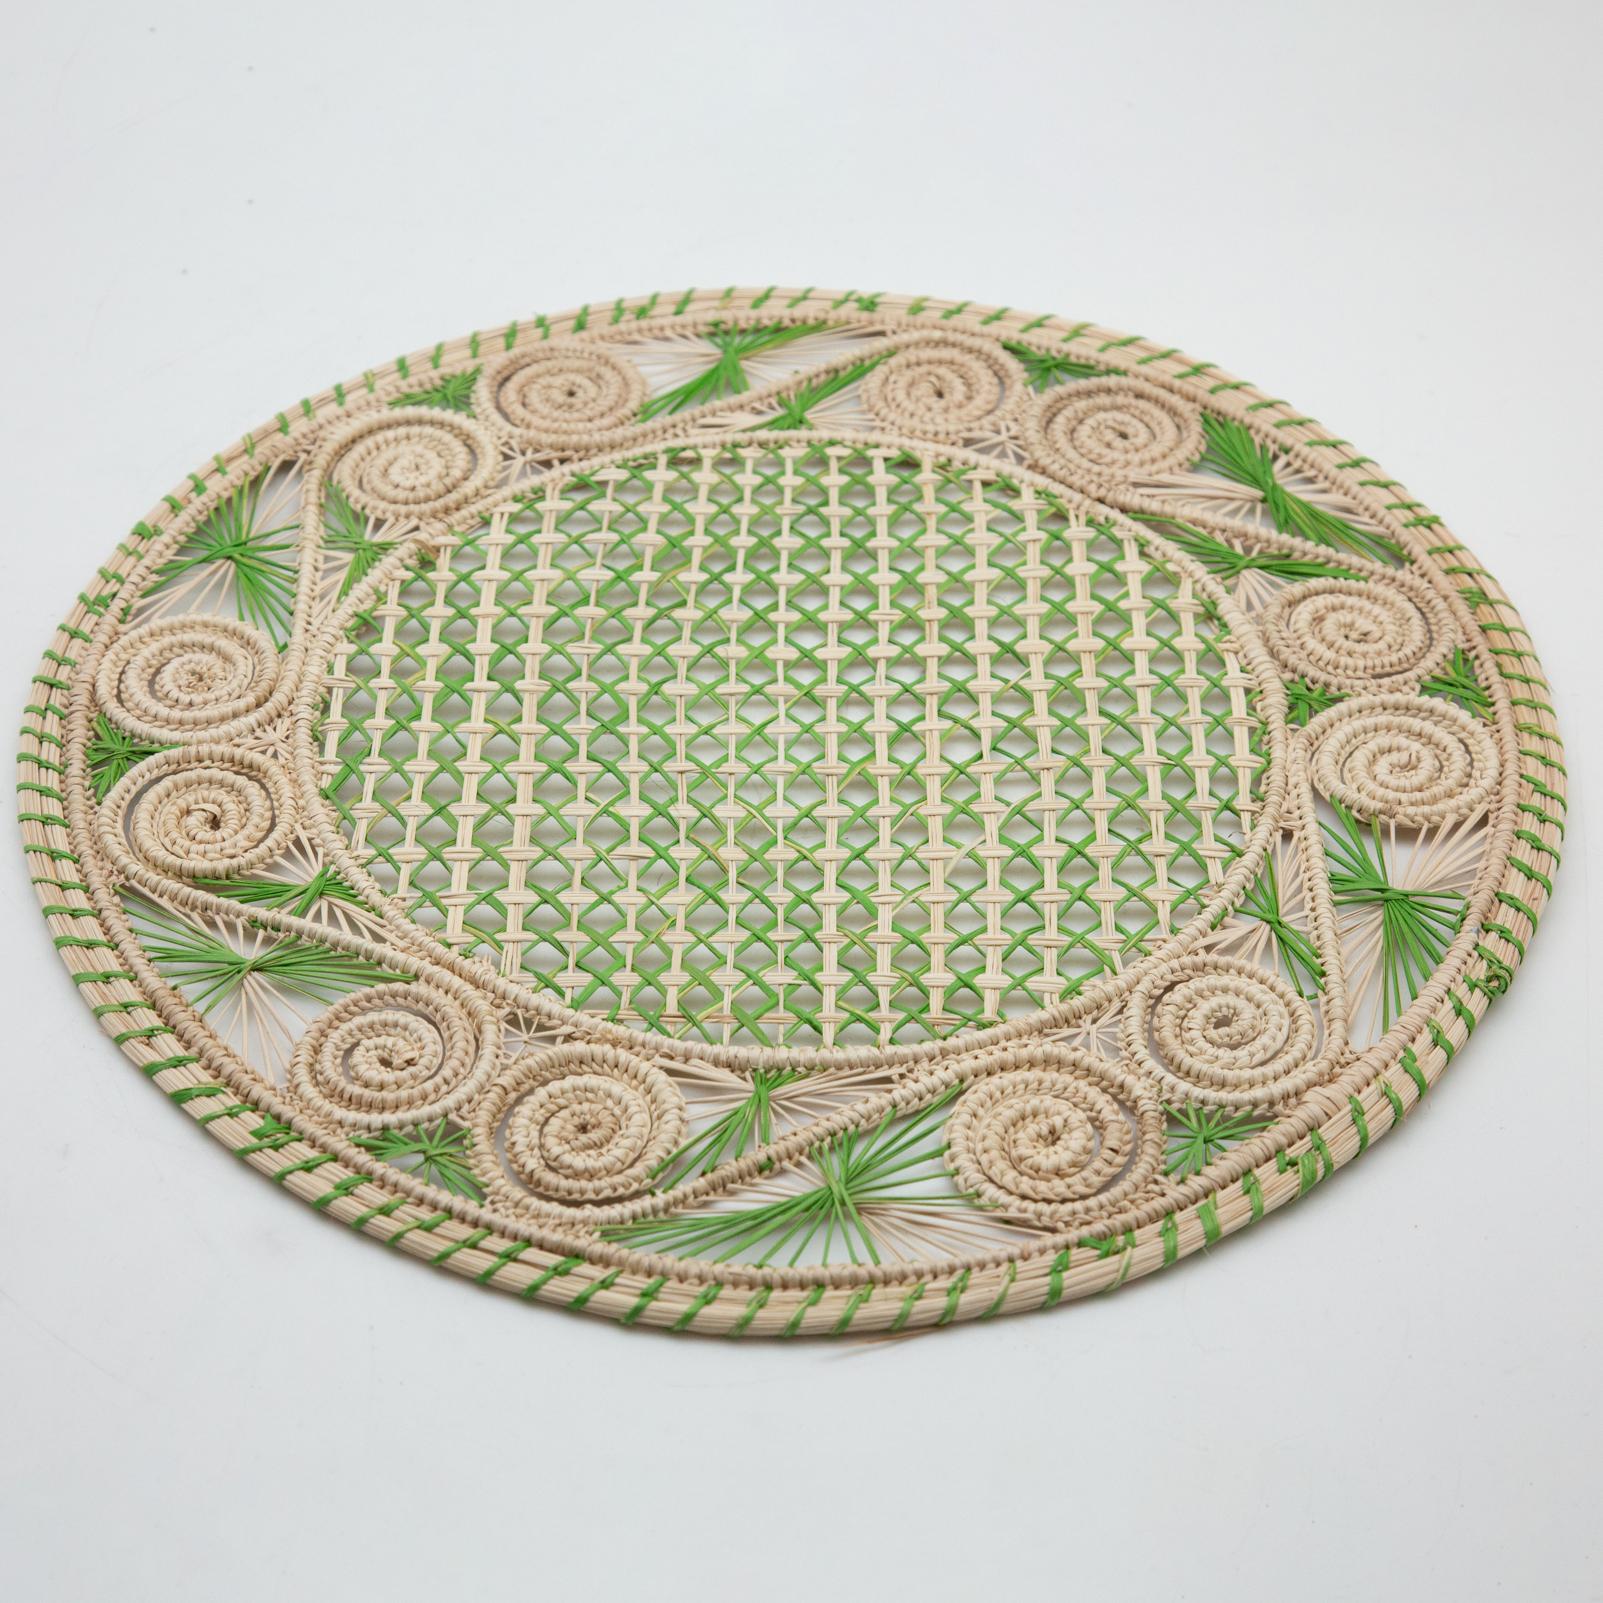 Handwoven Iraca fibre placemats made in Columbia. Set of 8.